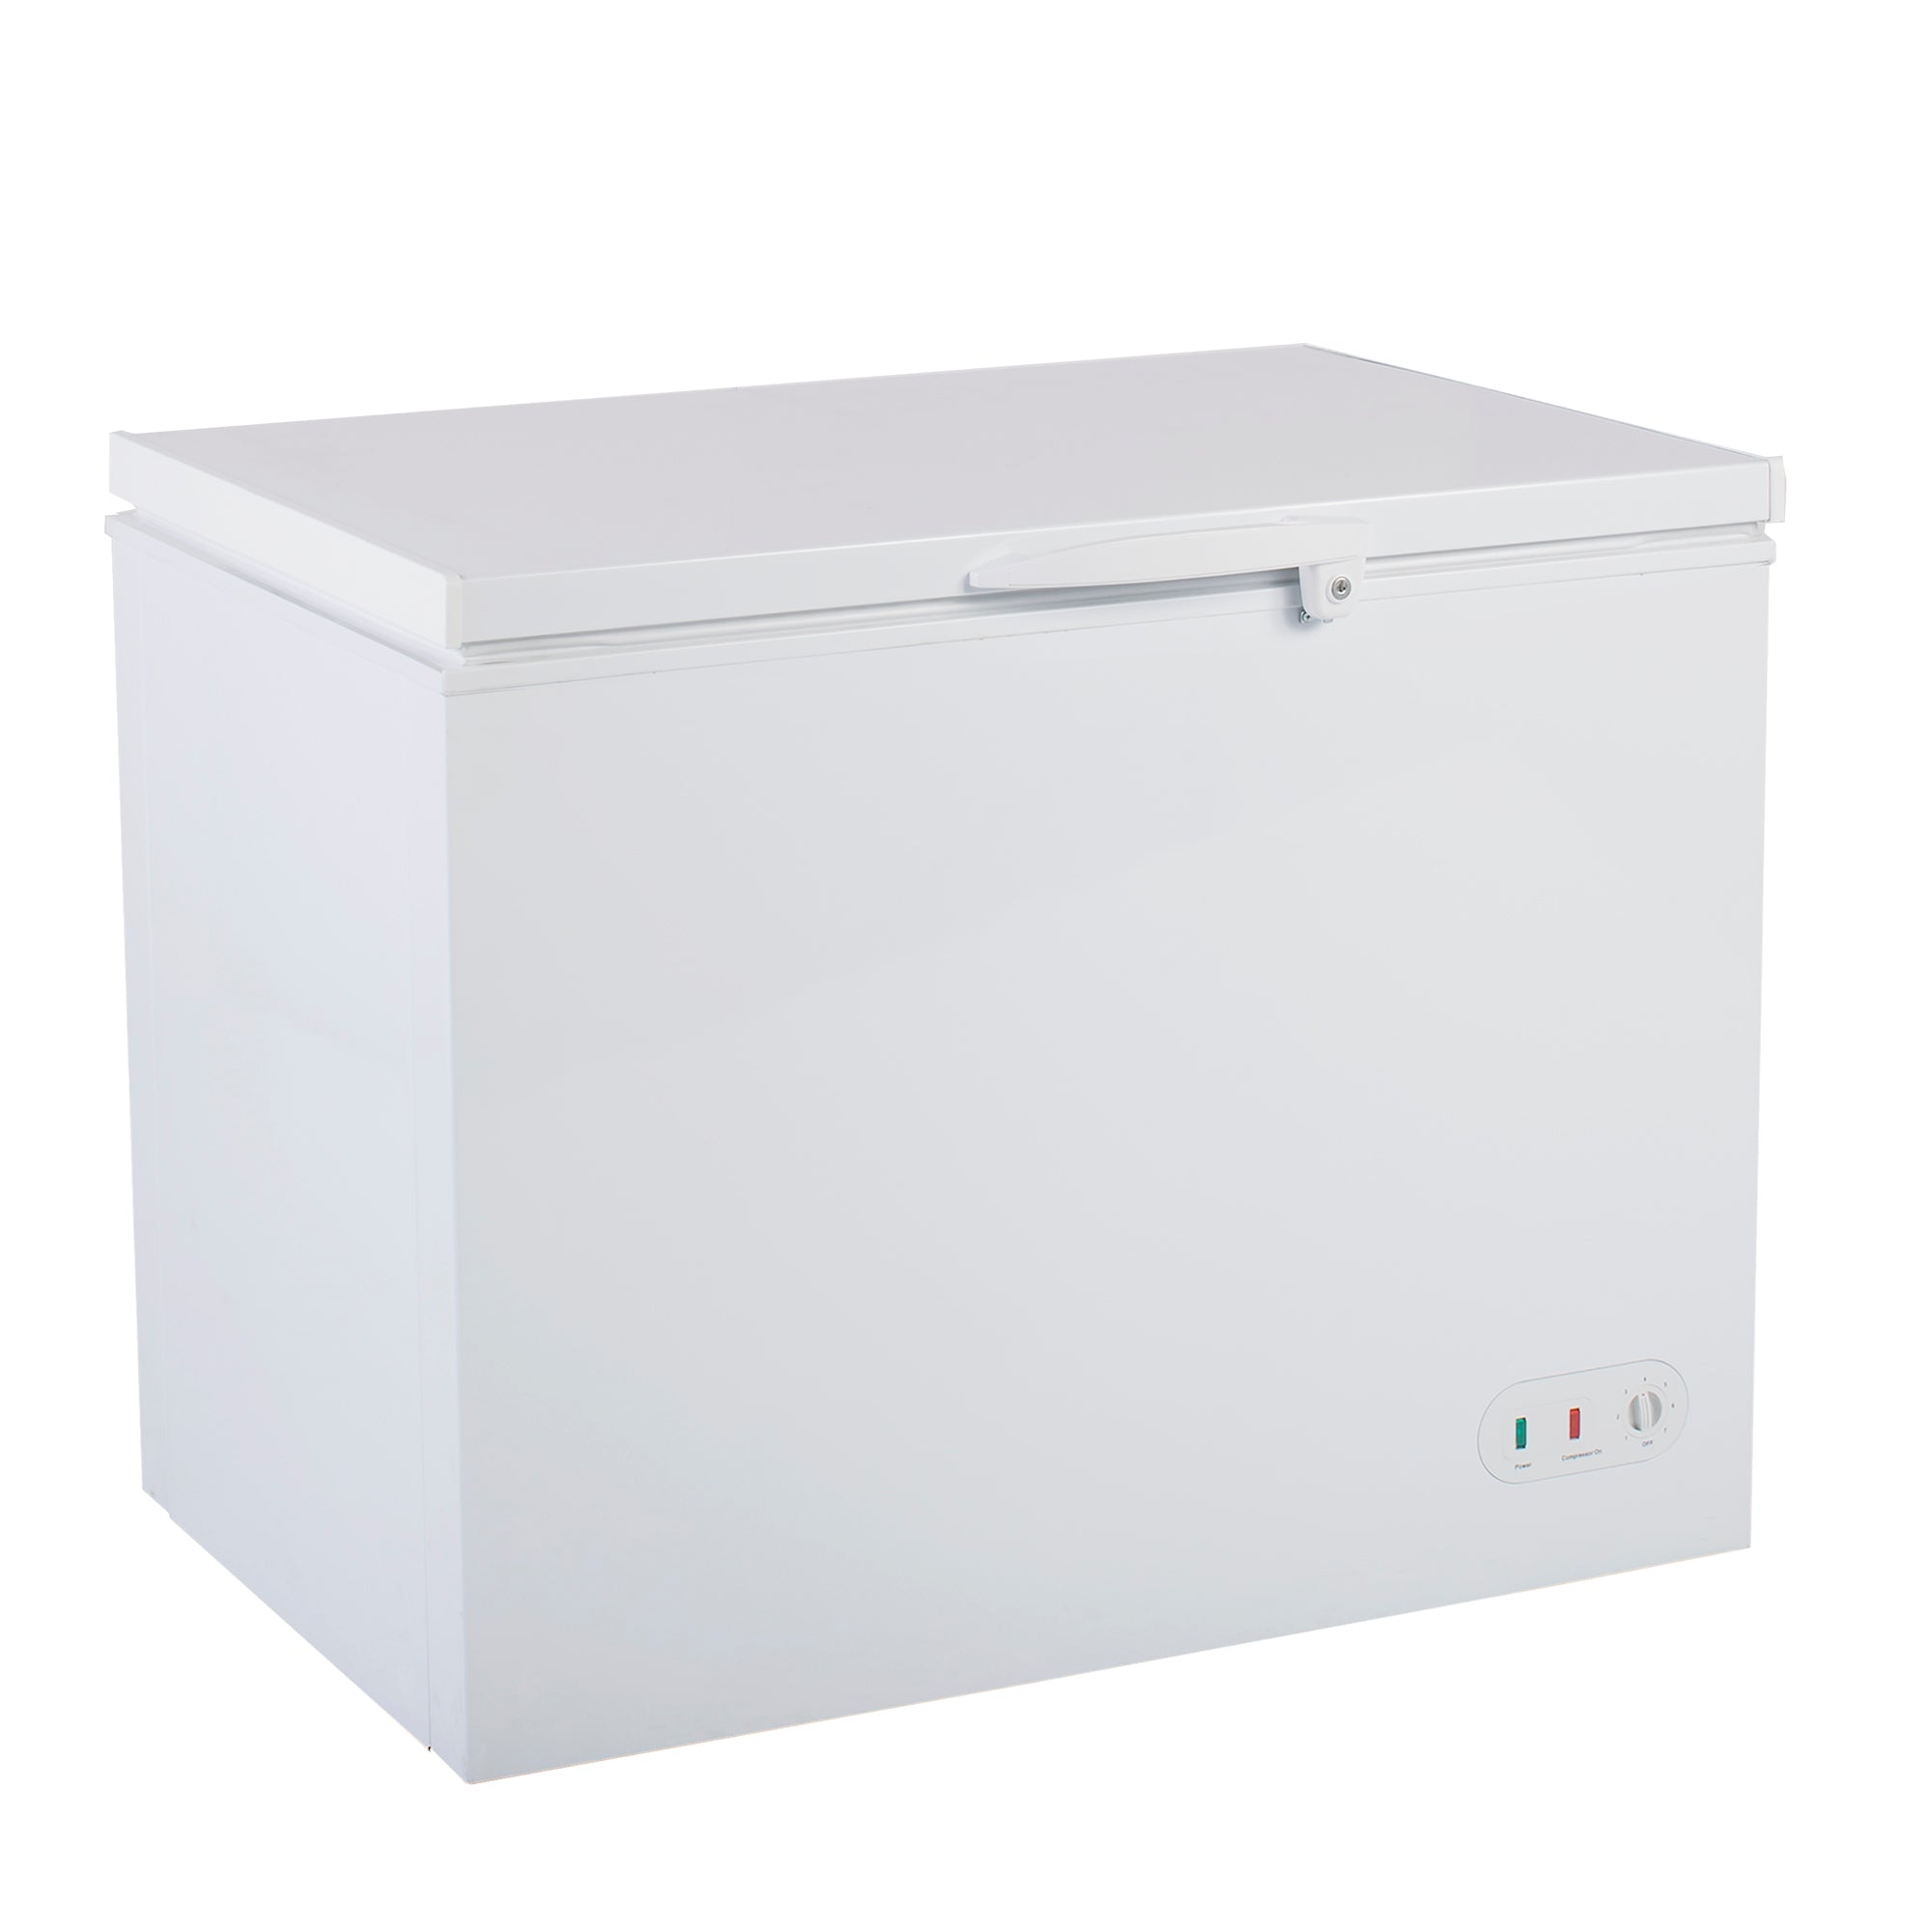 Maxx Cold - MXSH12.7SHC, Maxx Cold Chest Freezer with Solid Top, 50"W, 12.7 cu. ft. Storage Capacity, Locking Lid, Garage Ready, in White